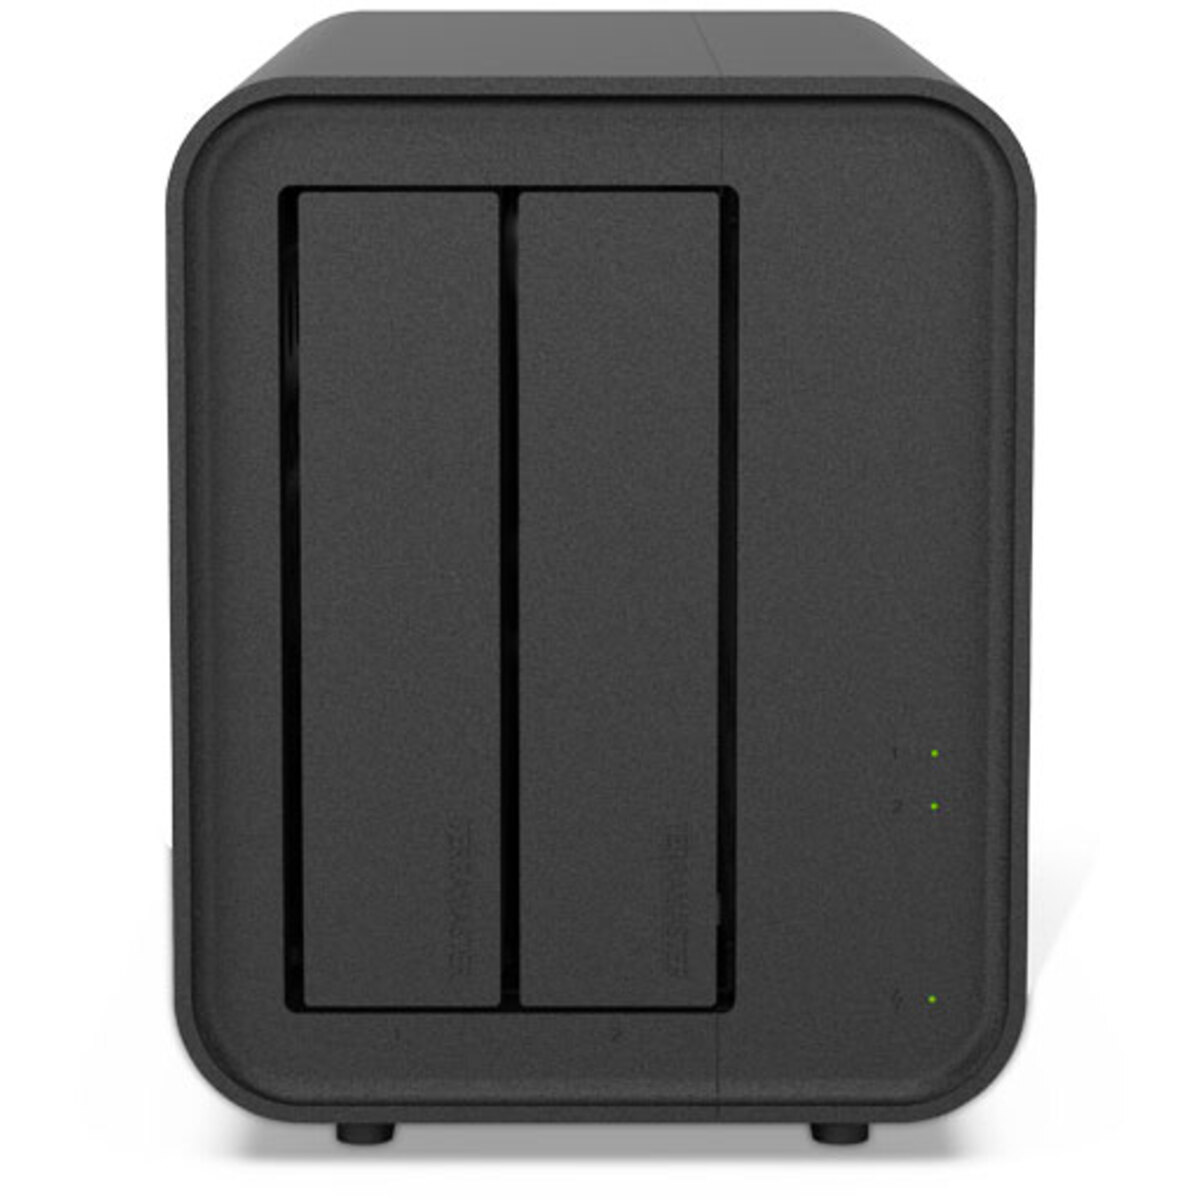 TerraMaster D5 Hybrid 24tb 2-Bay Desktop Multimedia / Power User / Business DAS - Direct Attached Storage Device 2x12tb Seagate IronWolf Pro ST12000NT001 3.5 7200rpm SATA 6Gb/s HDD NAS Class Drives Installed - Burn-In Tested - ON SALE D5 Hybrid